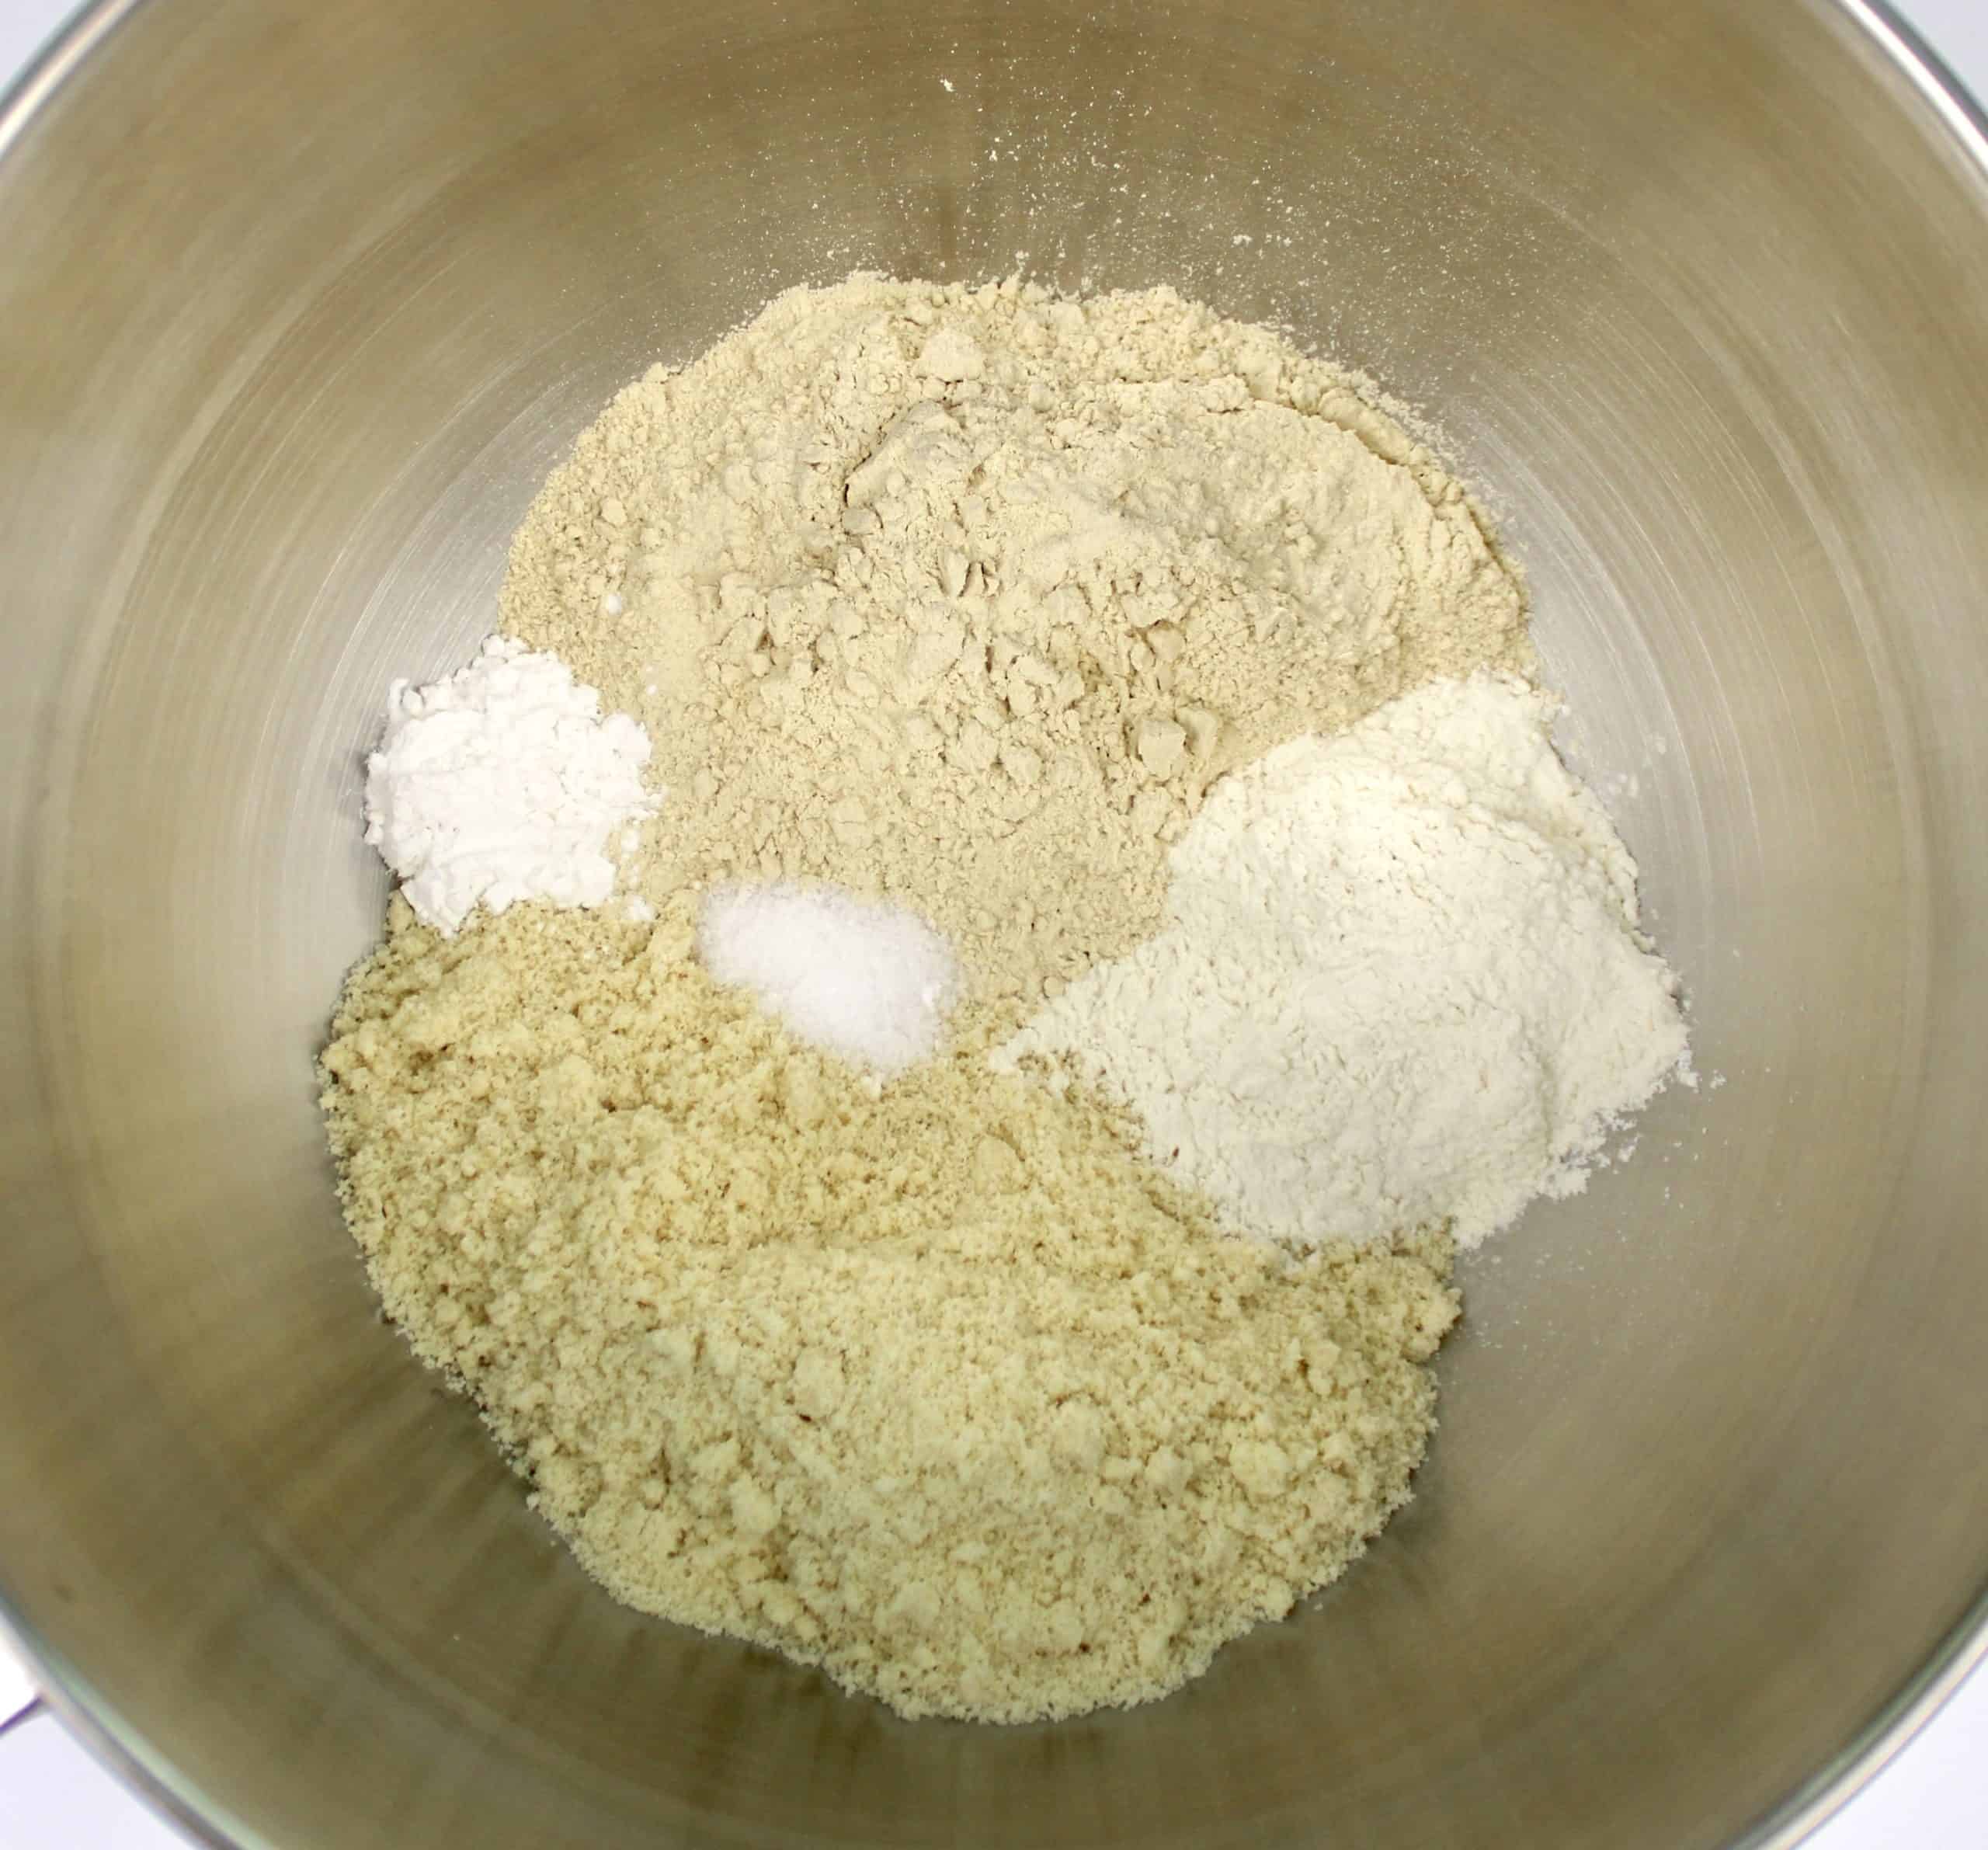 dry ingredients for keto tortillas in stand mixer bowl unmixed